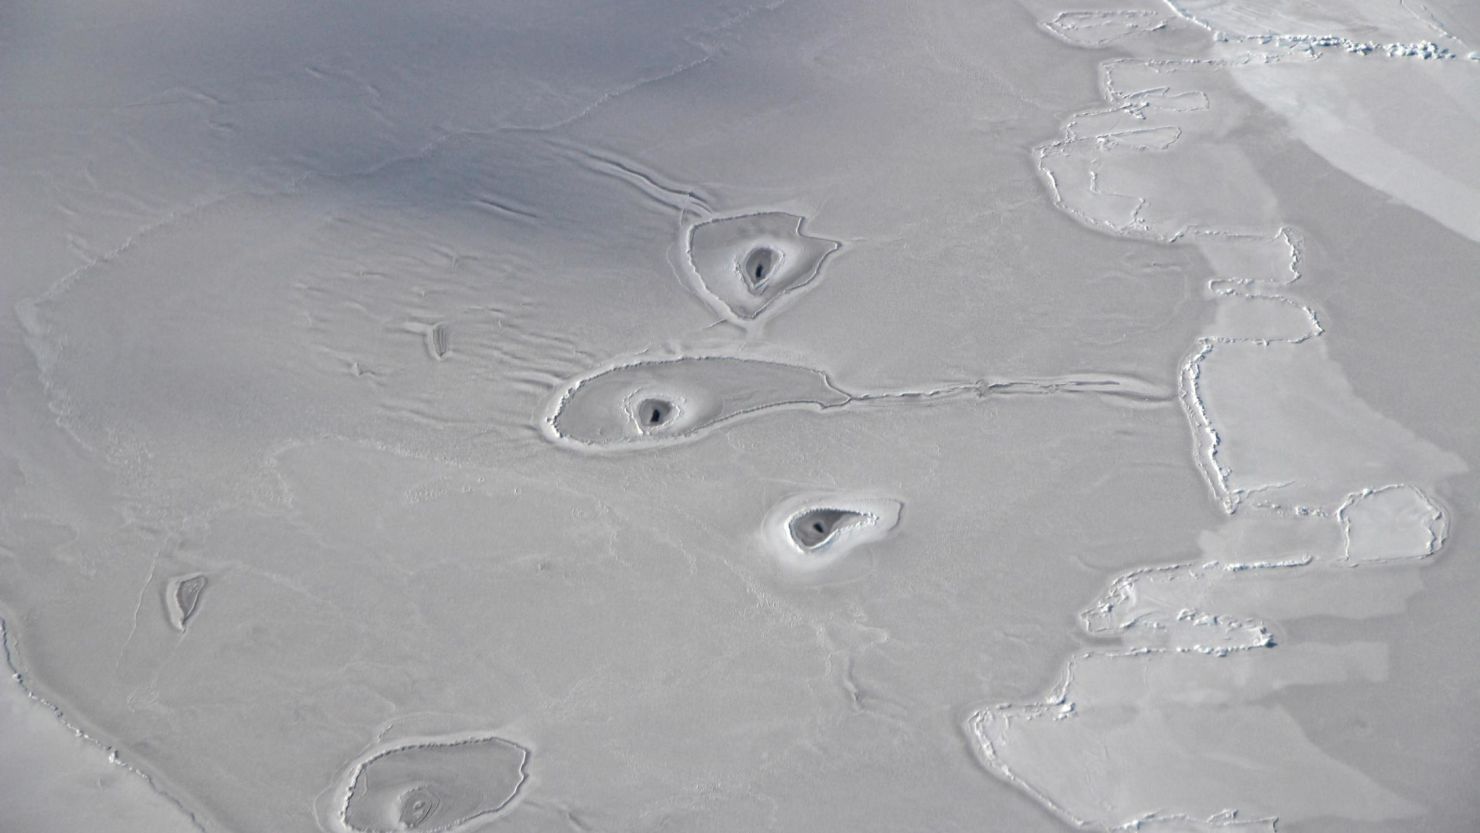 This NASA image shows unexplained holes in the surface of some ice in the Beaufort Sea.